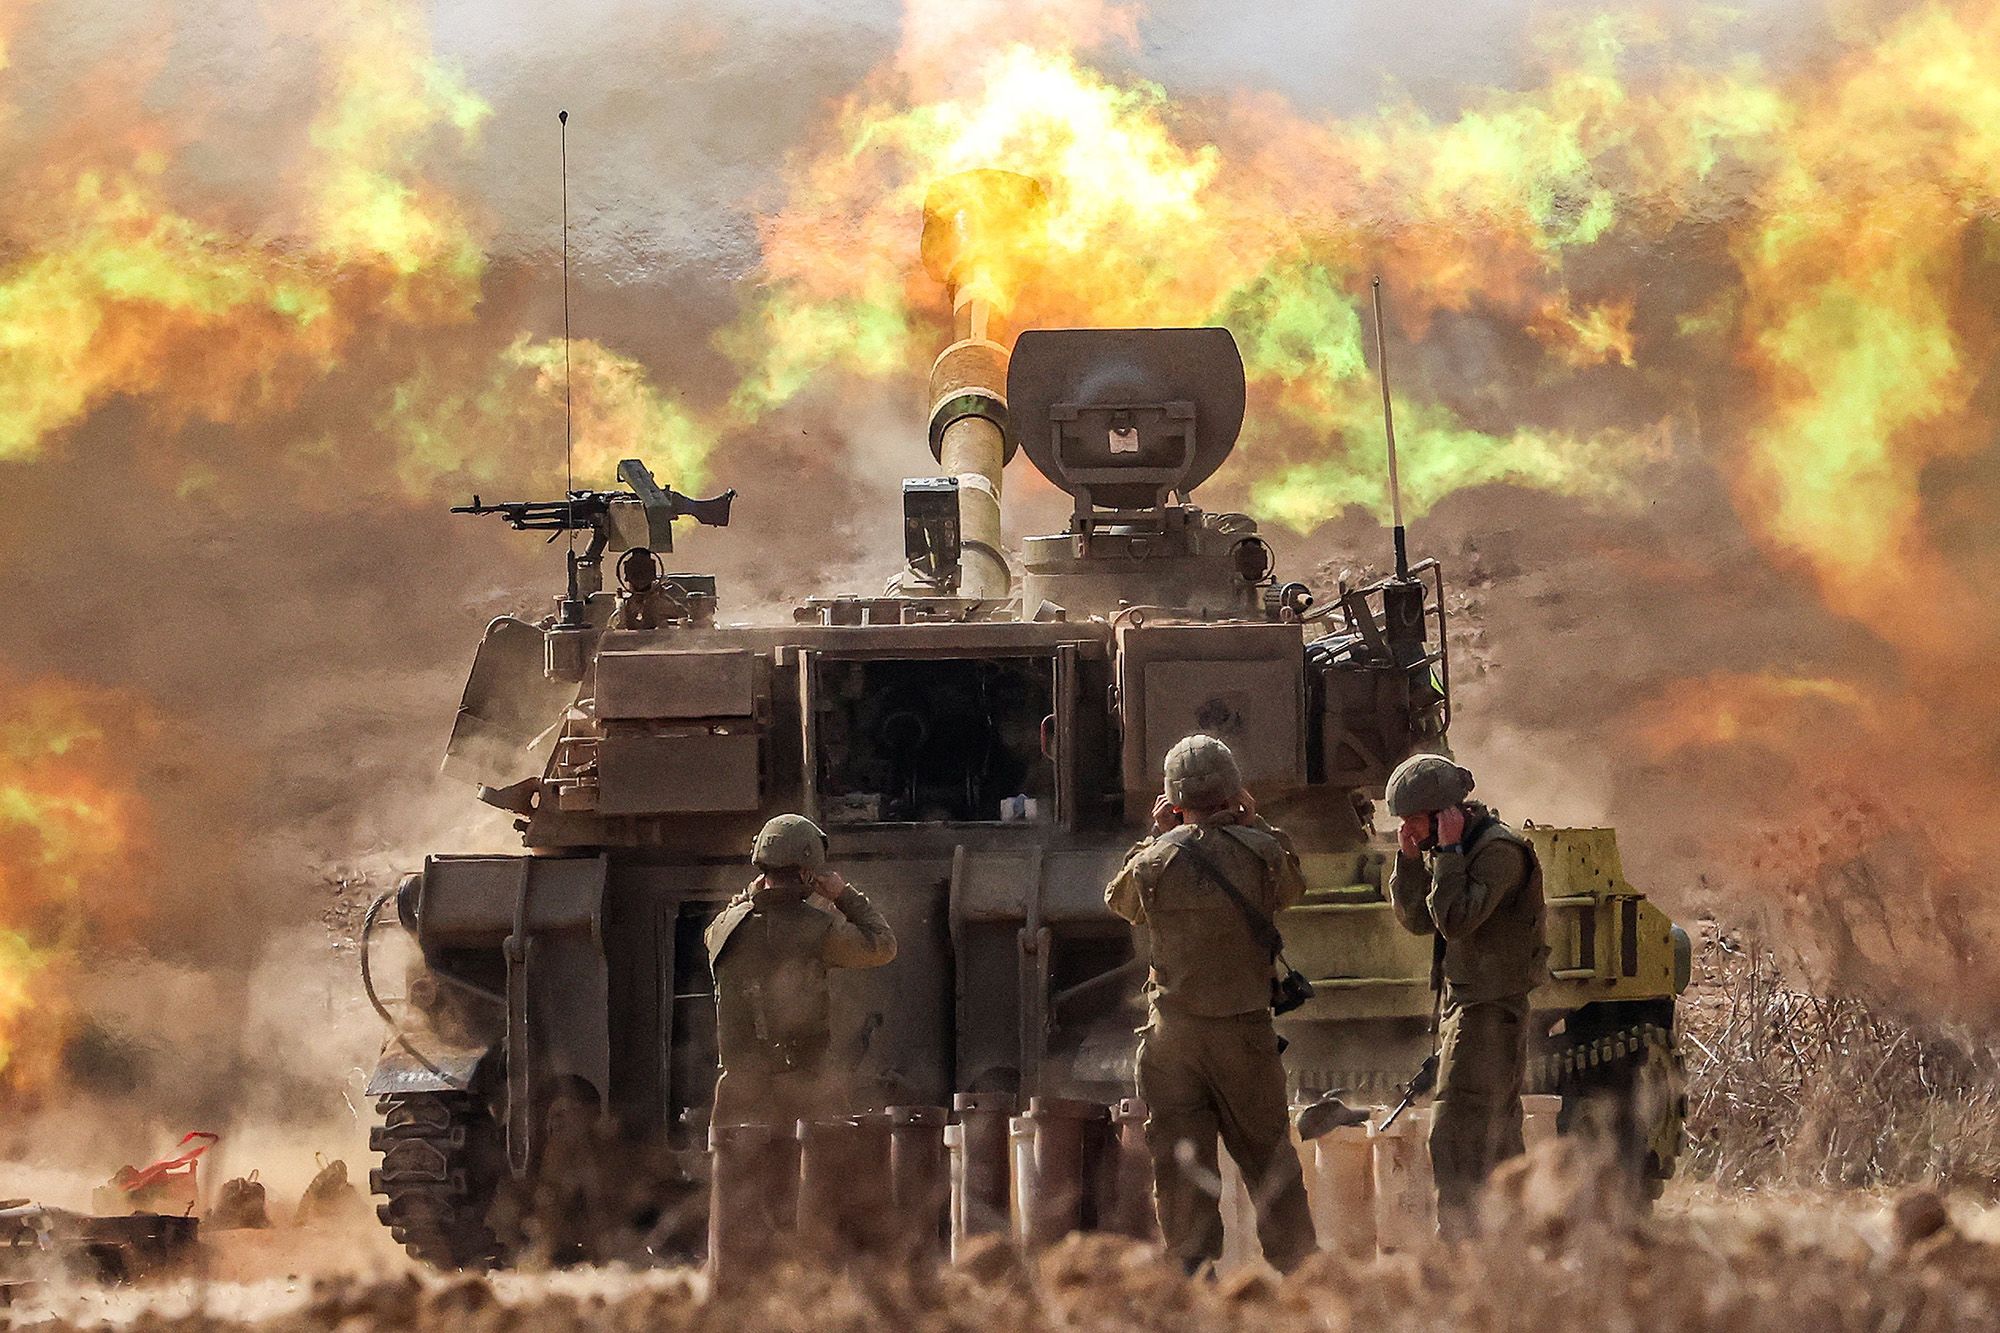 An Israeli army self-propelled howitzer fires rounds near the border with Gaza in southern Israel on October 11.